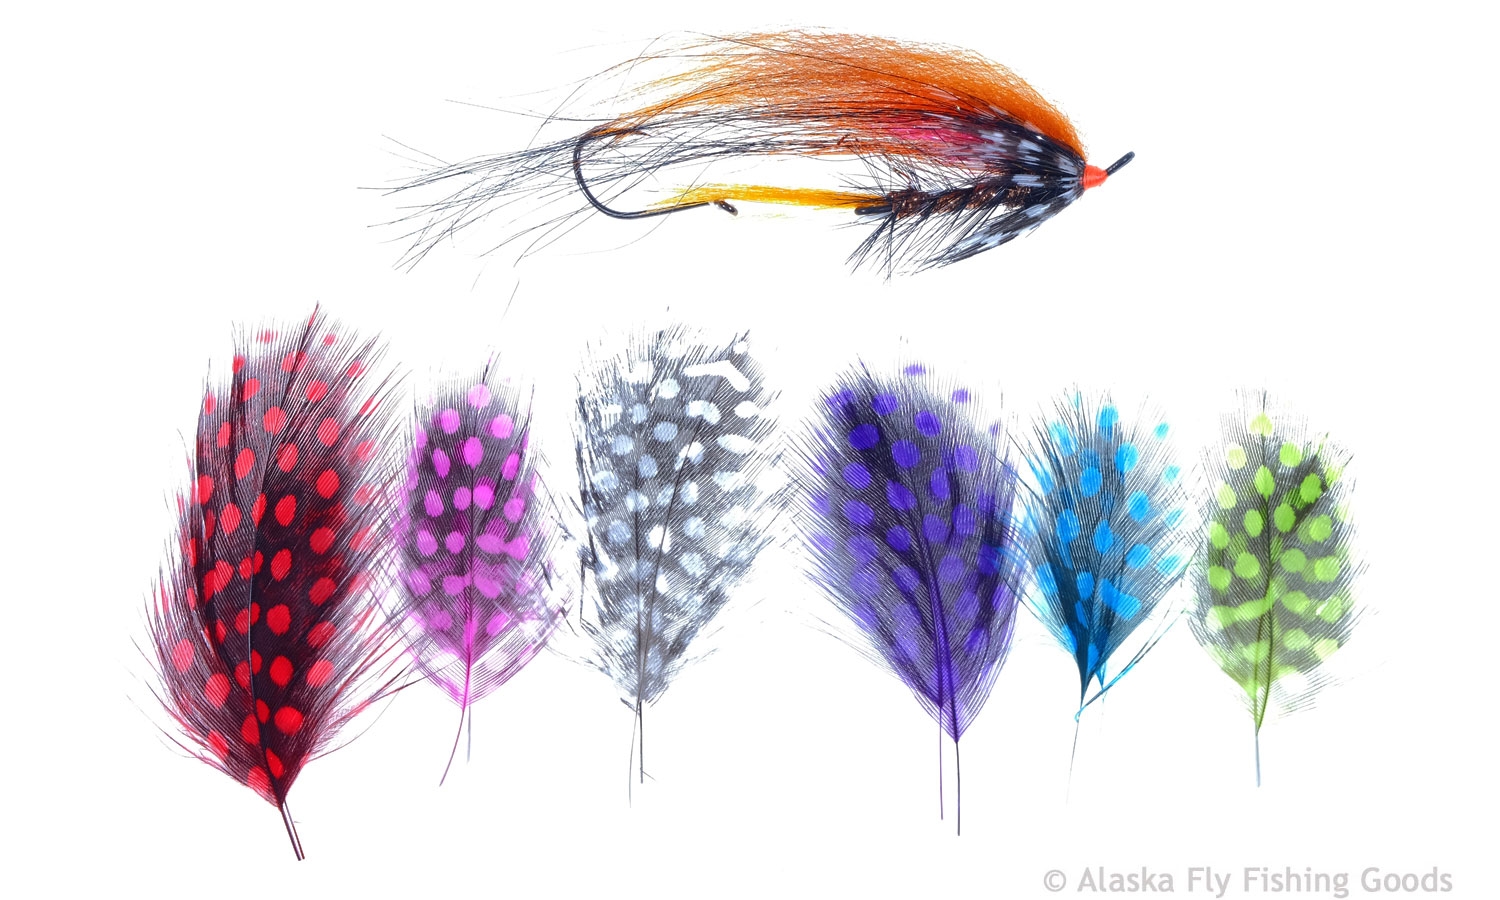 Strung Guinea Feathers - Alaska Fly Fishing Goods